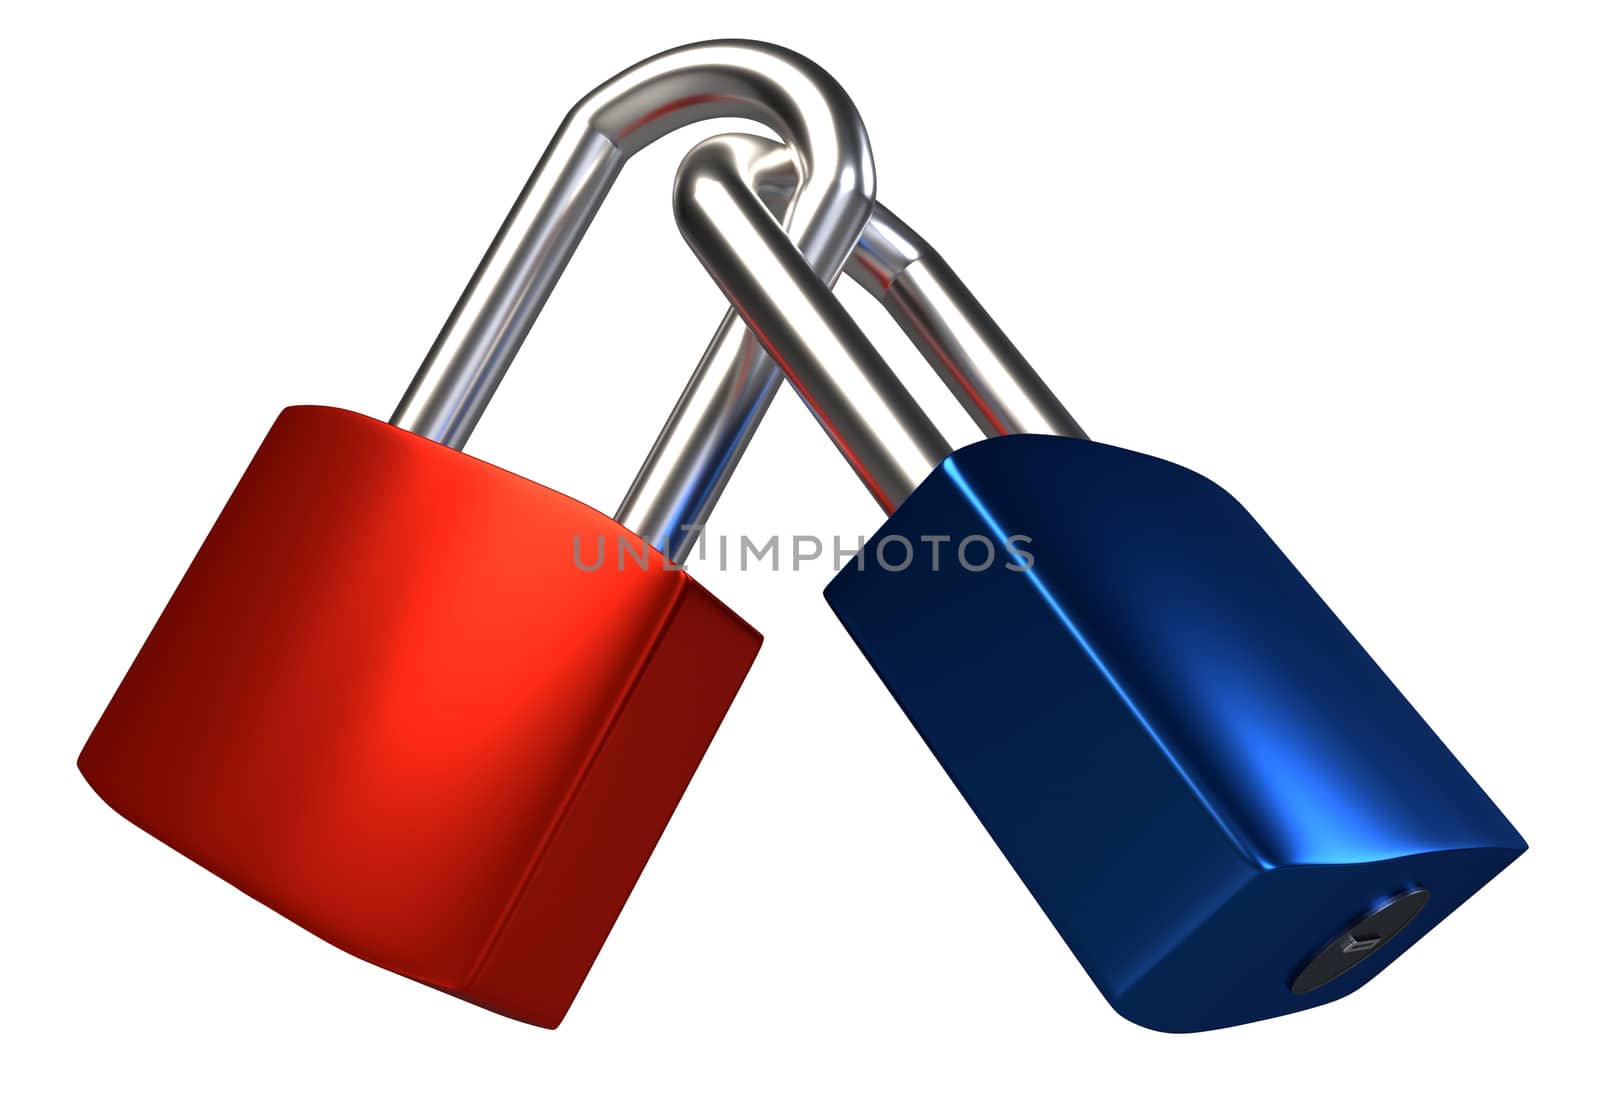 Two locked padlocks isolated on white background. 3D rendering